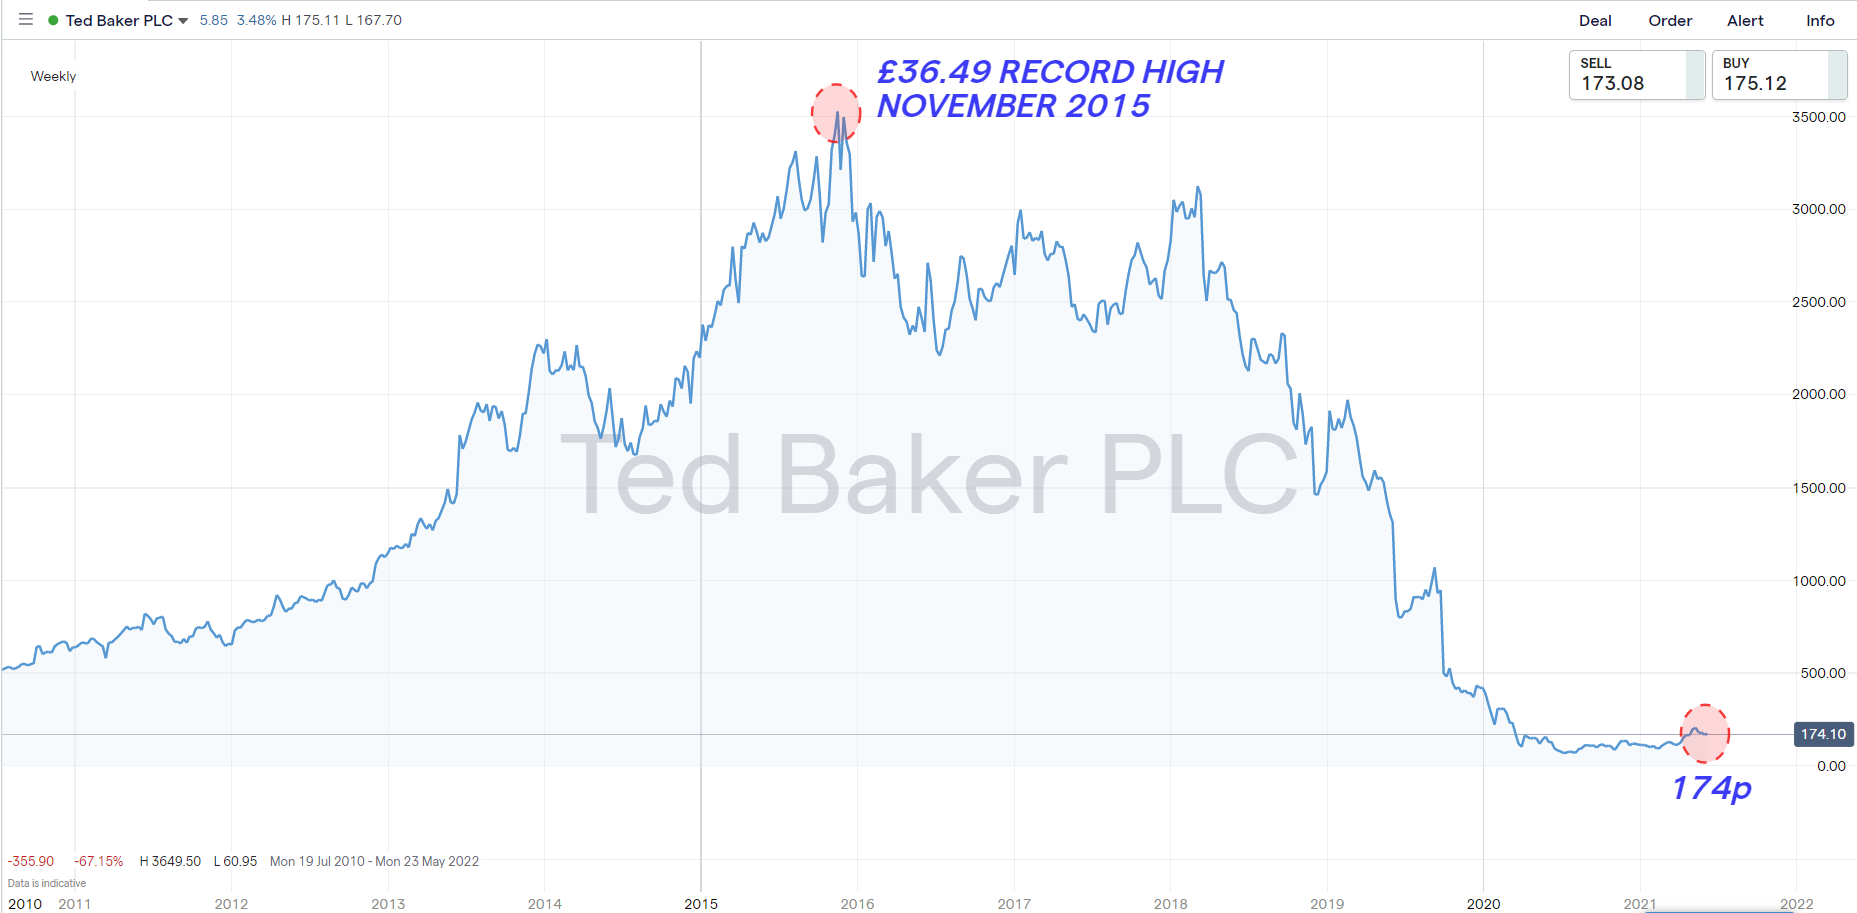 Ted Baker historic weekly line chart